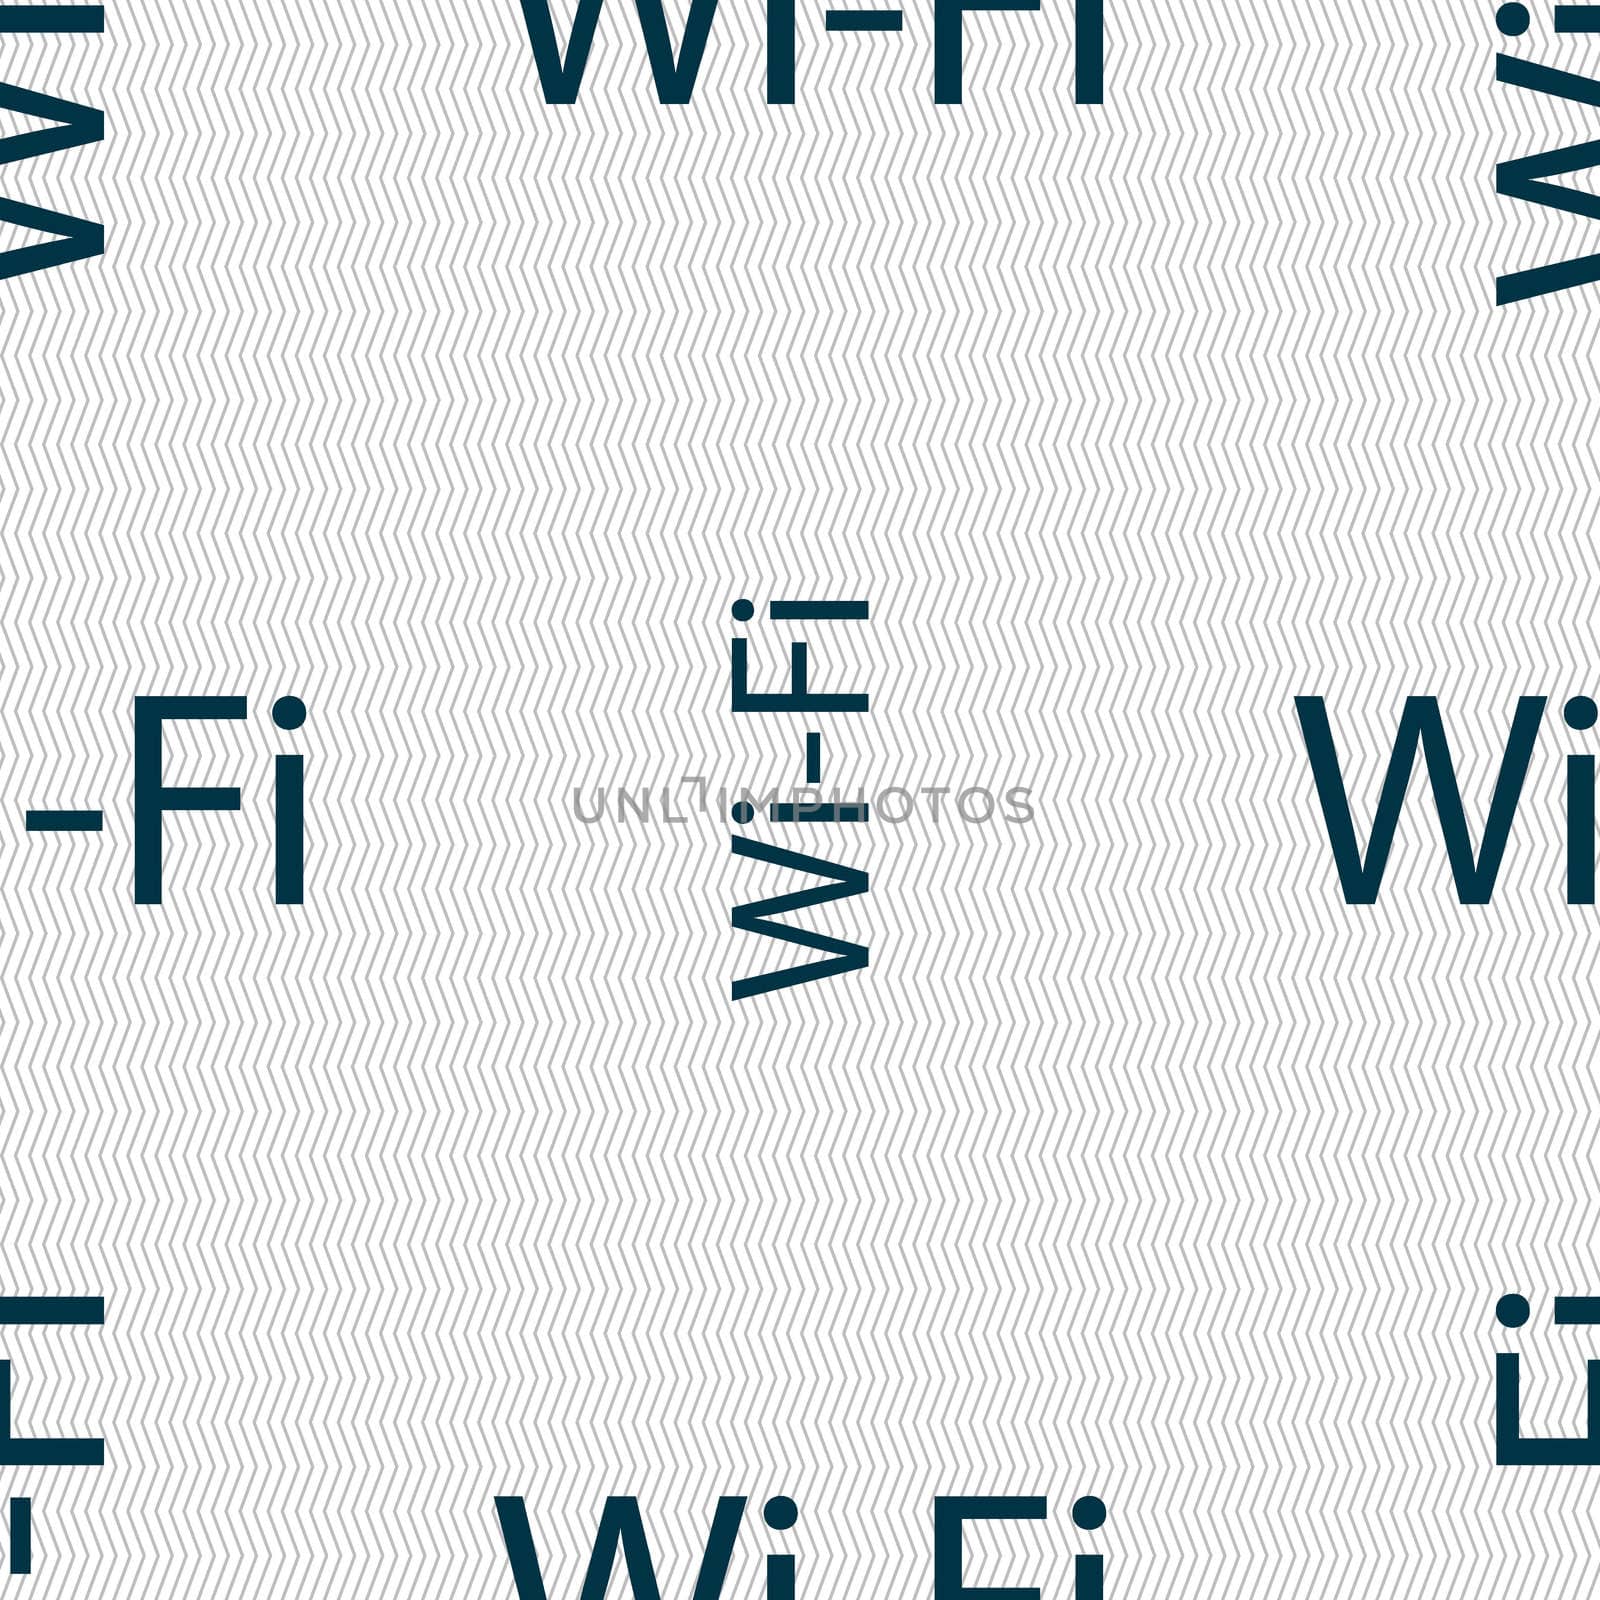 Free wifi sign. Wi-fi symbol. Wireless Network icon. Seamless abstract background with geometric shapes.  by serhii_lohvyniuk